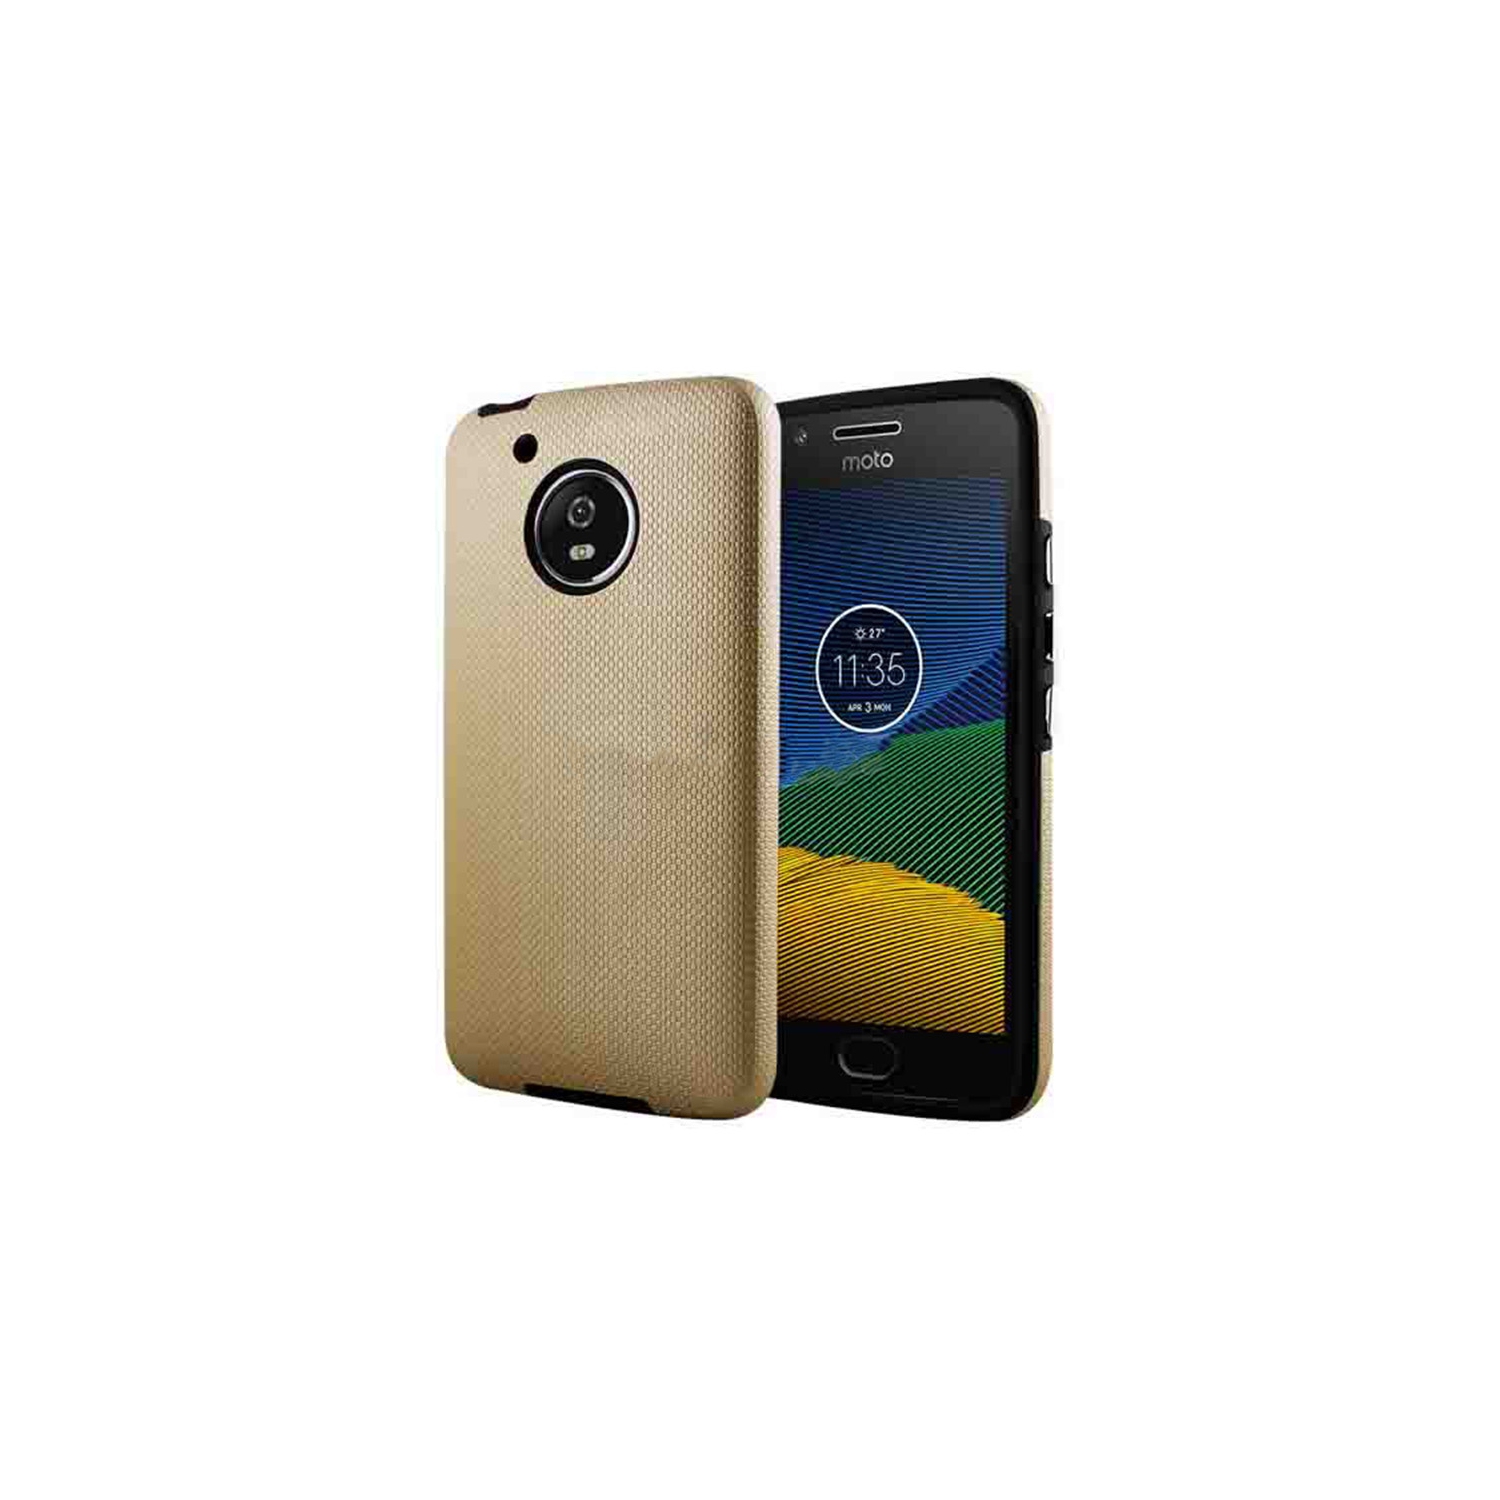 【CSmart】 Slim Fitted Hybrid Hard PC Shell Shockproof Scratch Resistant Case Cover for Motorola Moto Z3 Play, Gold